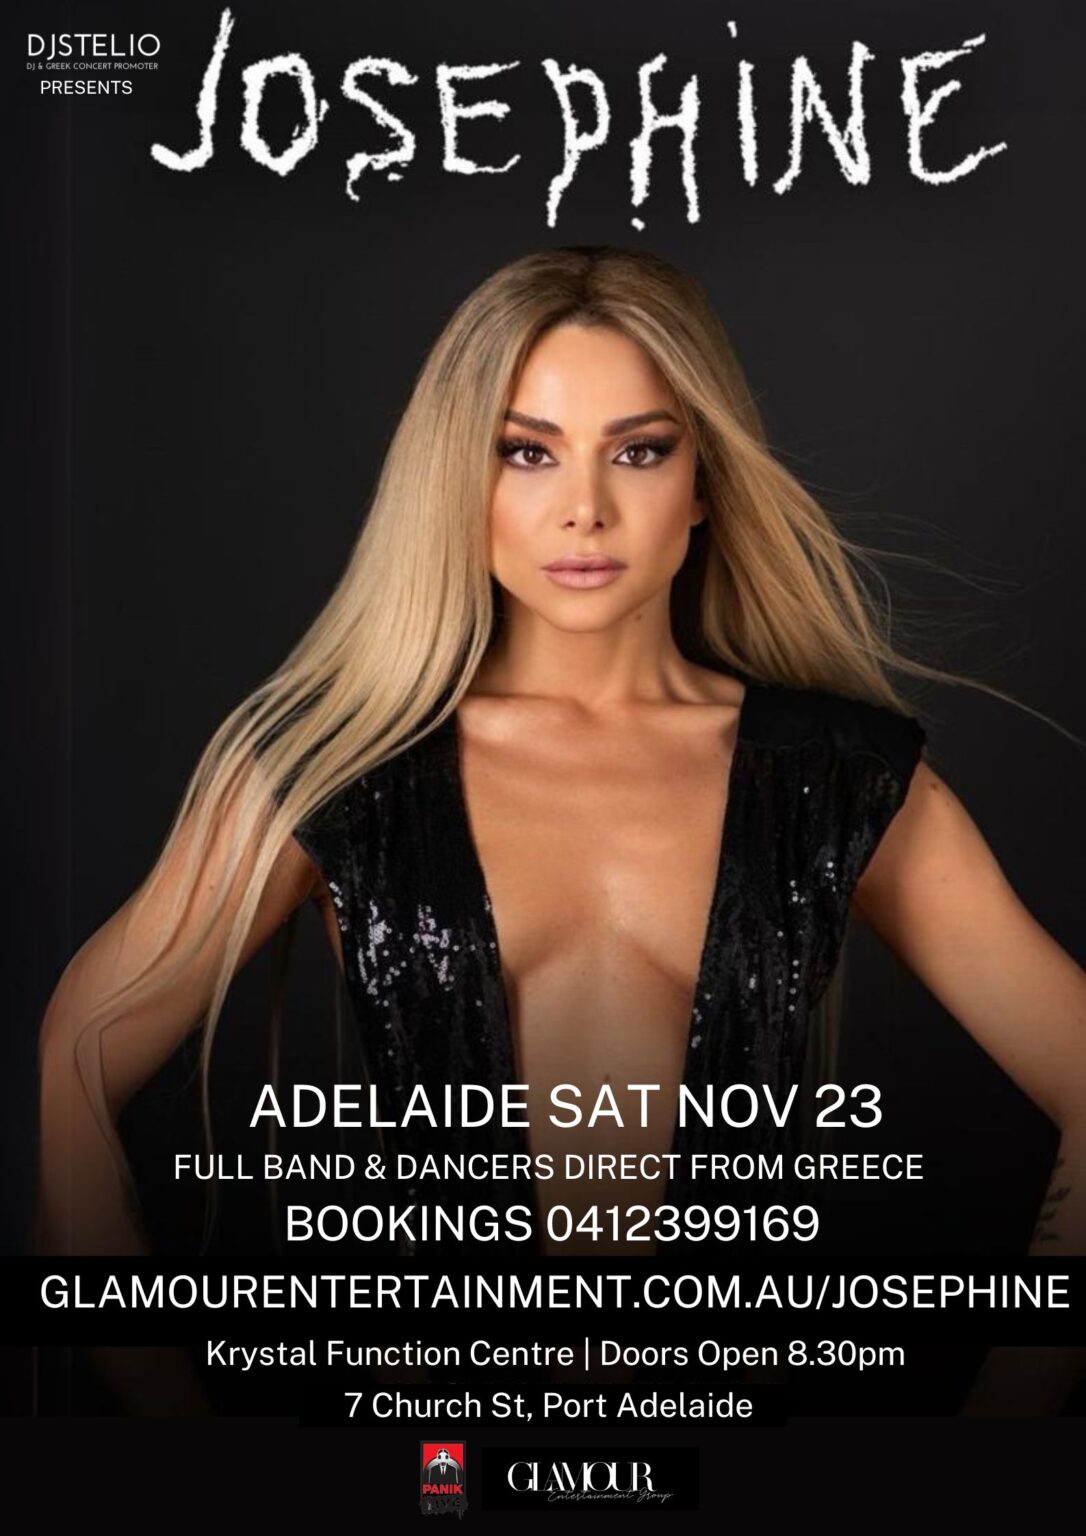 josephine in adelaide with dj stelio and glamour entertainment